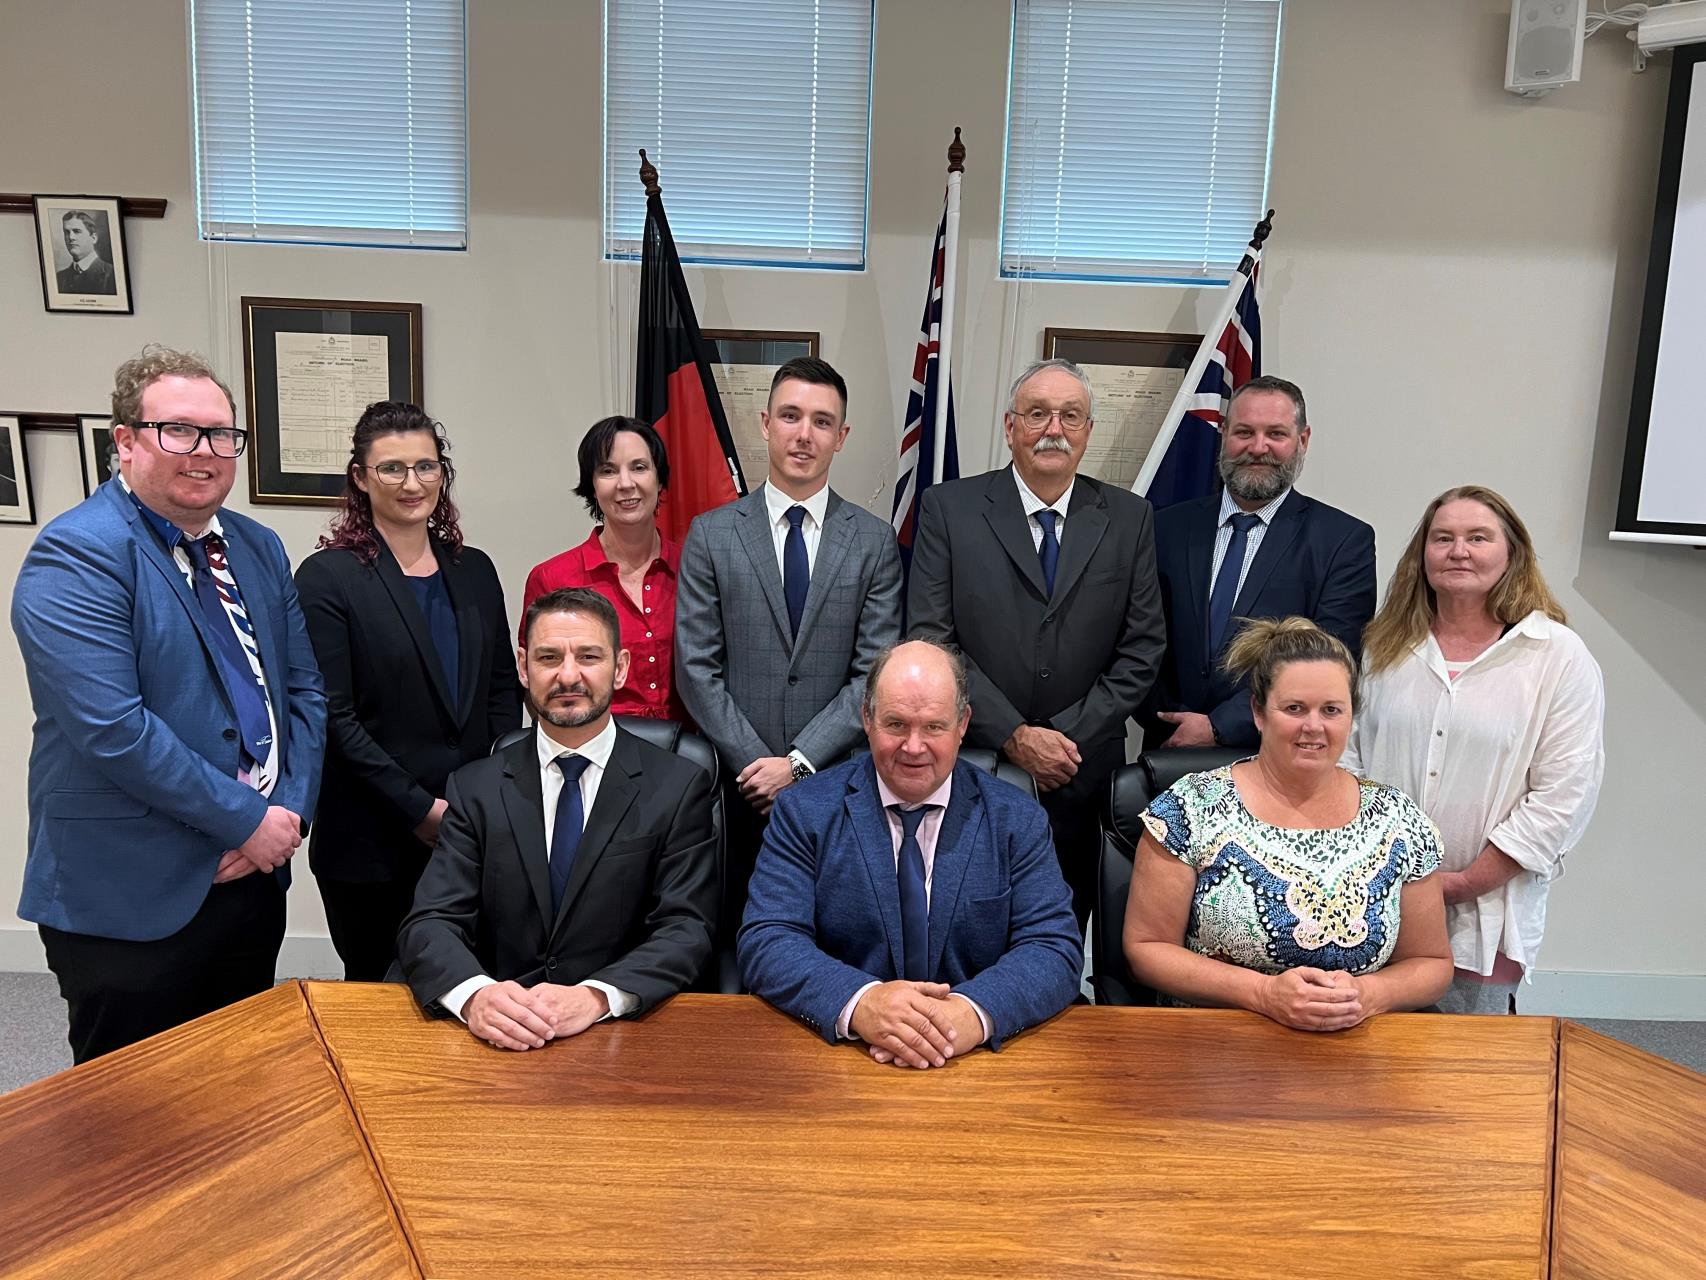 Members of the new Shire of Dardanup Council are (back, from left) Councillors Luke Davies, Taneta Bell, Stacey Gillespie, Jack Manoni, Mark Hutchinson and Tony Jenour, and (front, from left) Shire of Dardanup CEO André Schönfeldt, Shire President Tyrrell Gardiner and Deputy President Ellen Lilly.